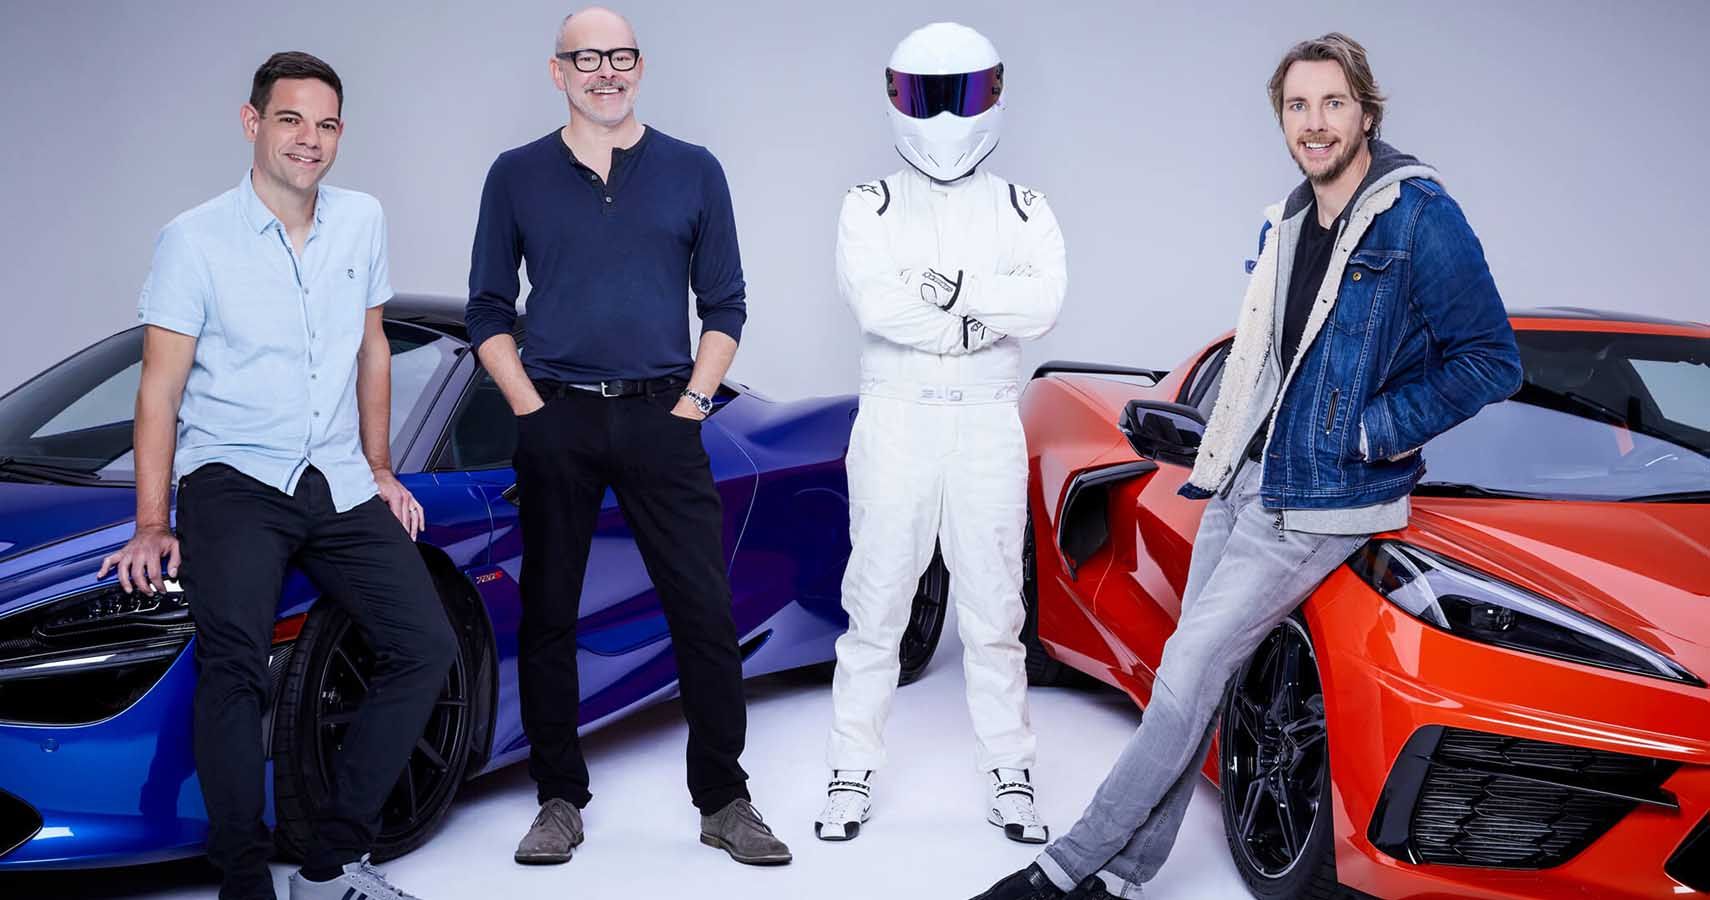 Here's How Dax Shepherd Got Involved With Top Gear America